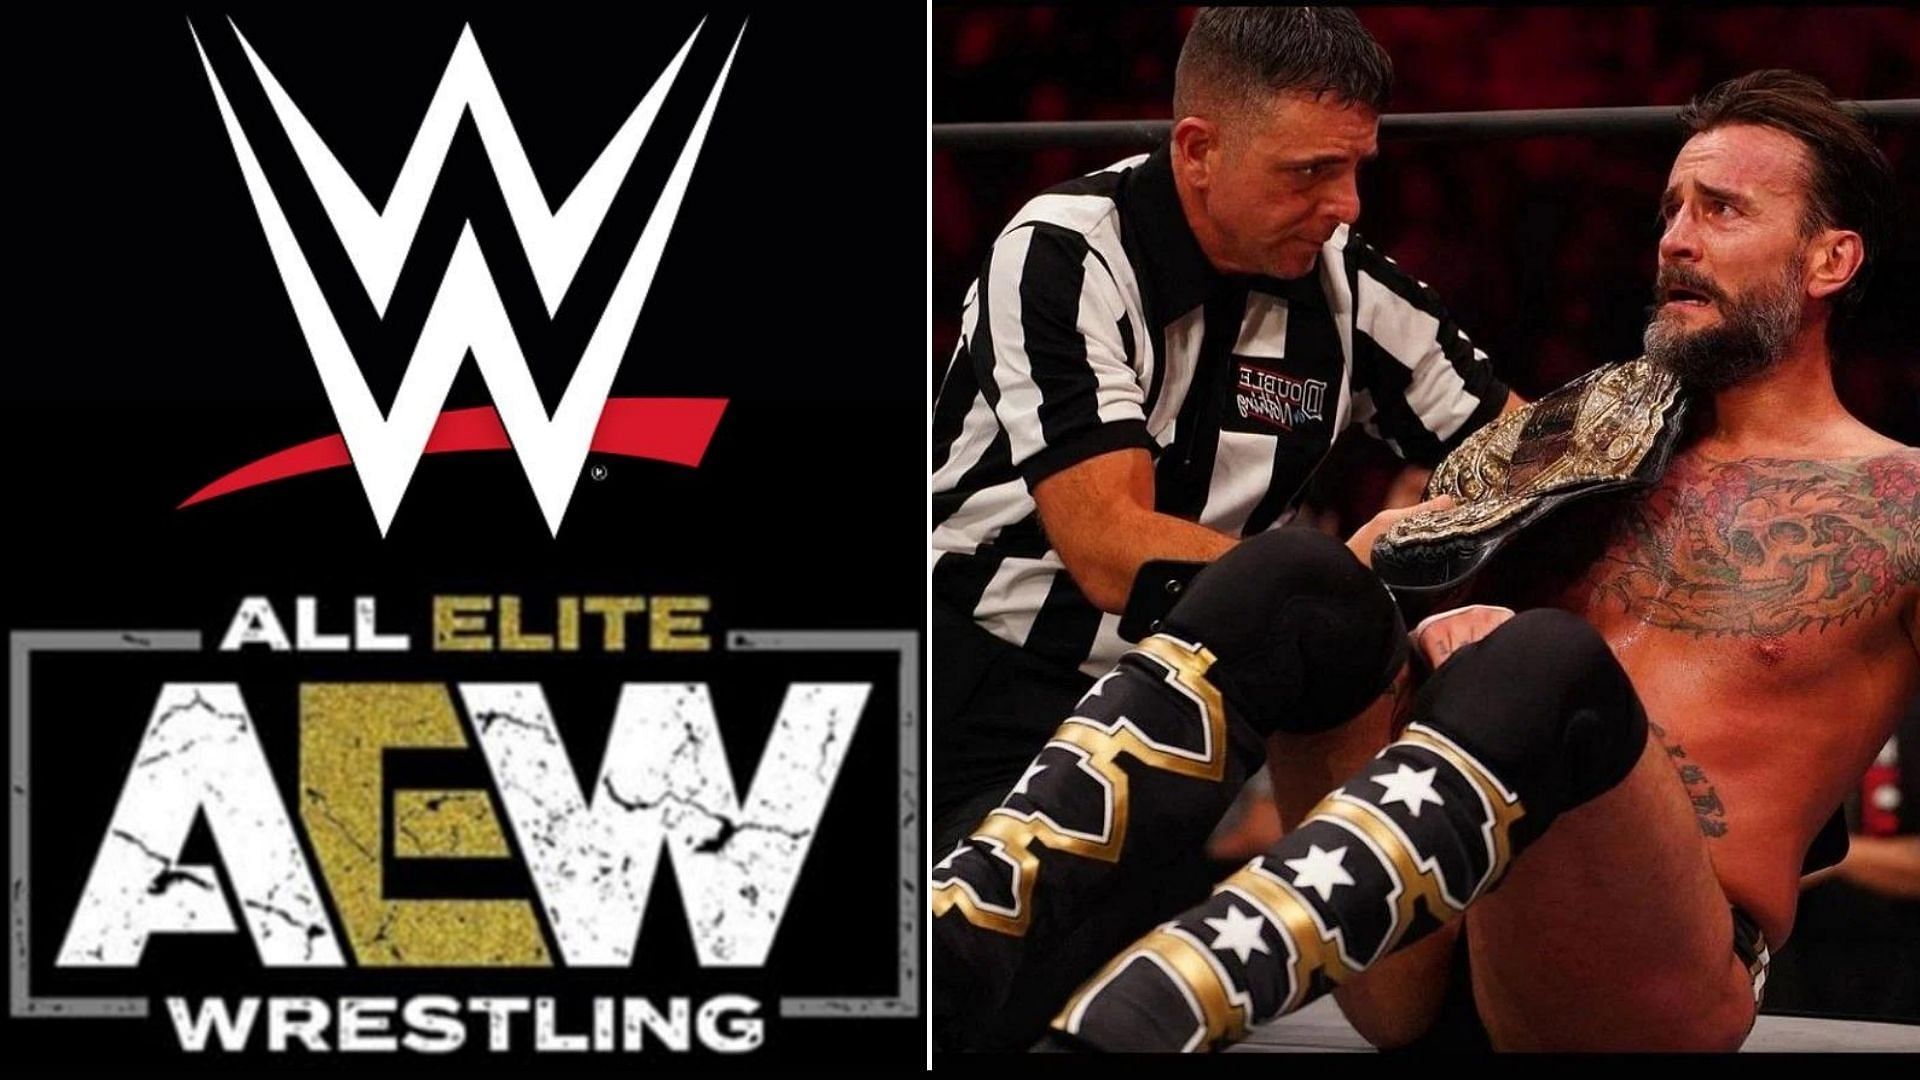 AEW will crown an Interim World Champion while CM Punk is away